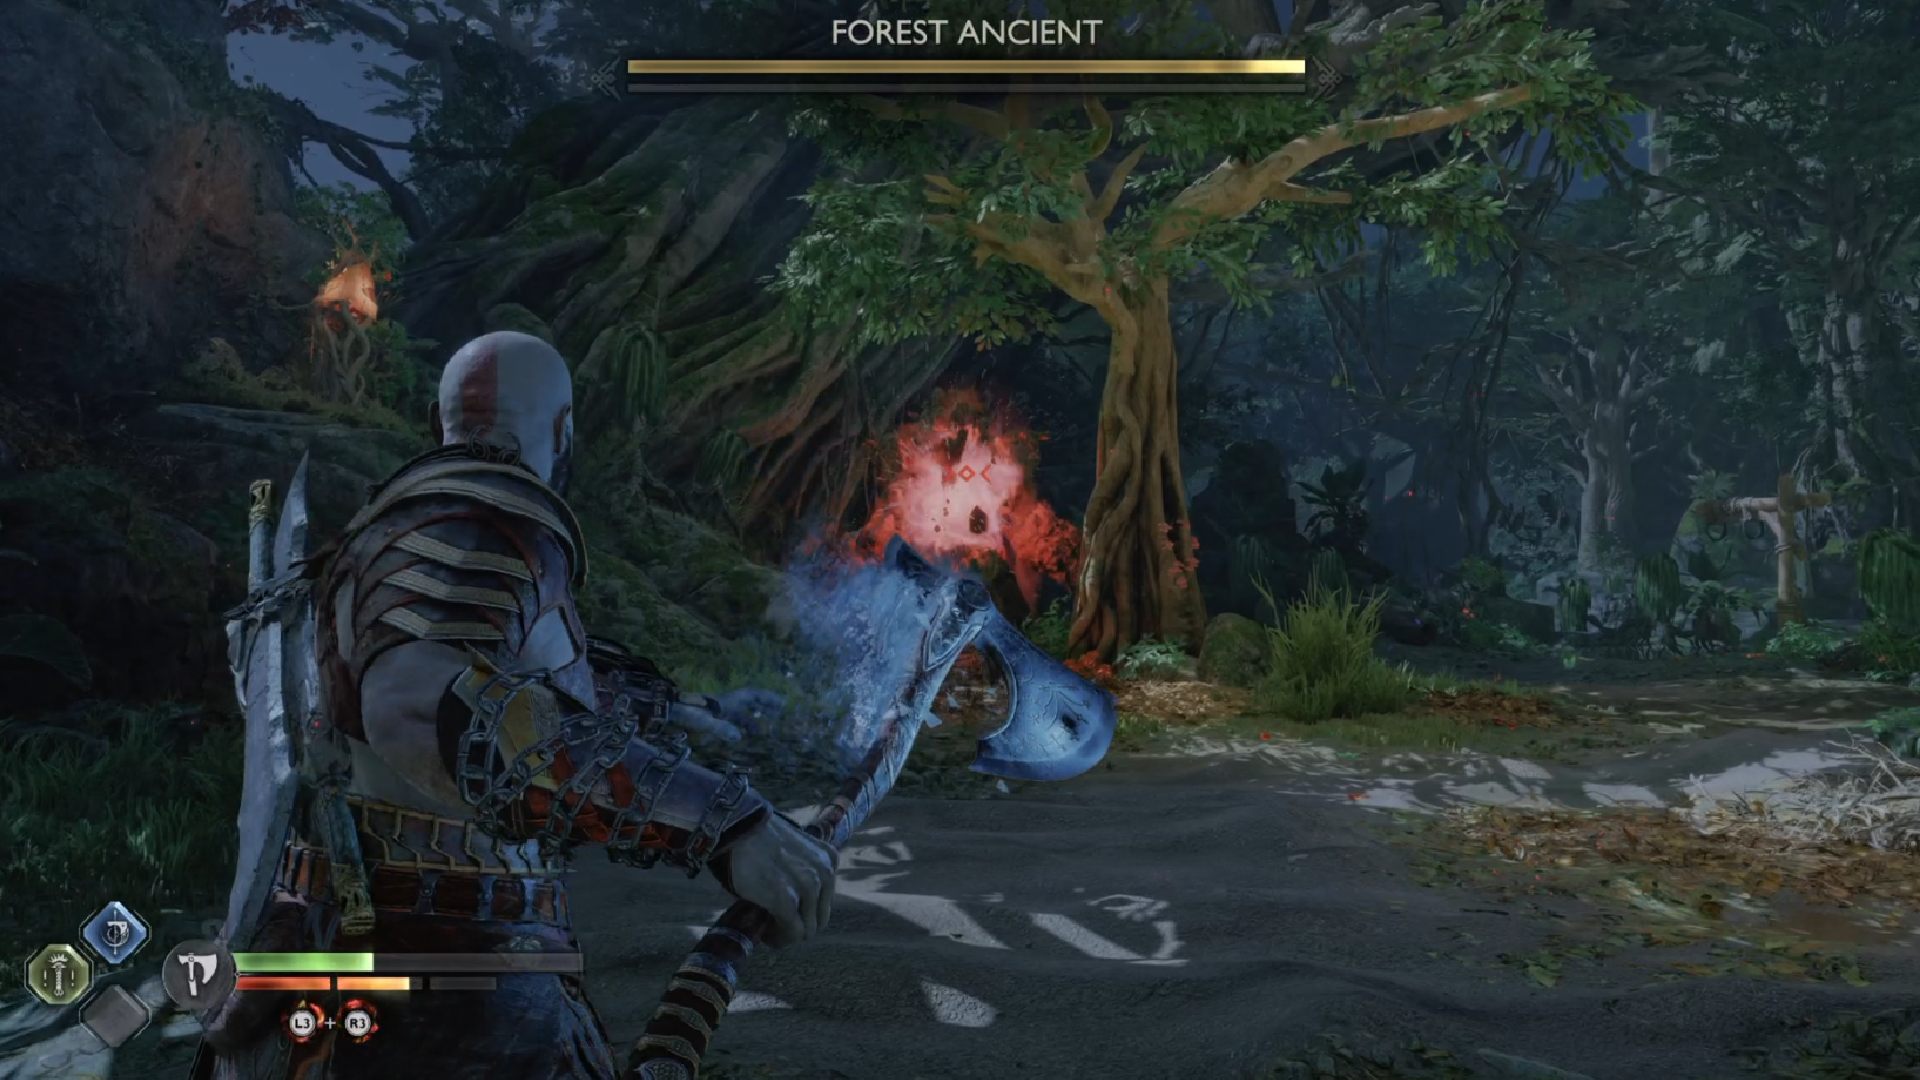 God of War Ragnarok Chaos Flame Locations: Kratos can be seen fighting a Forest Ancient